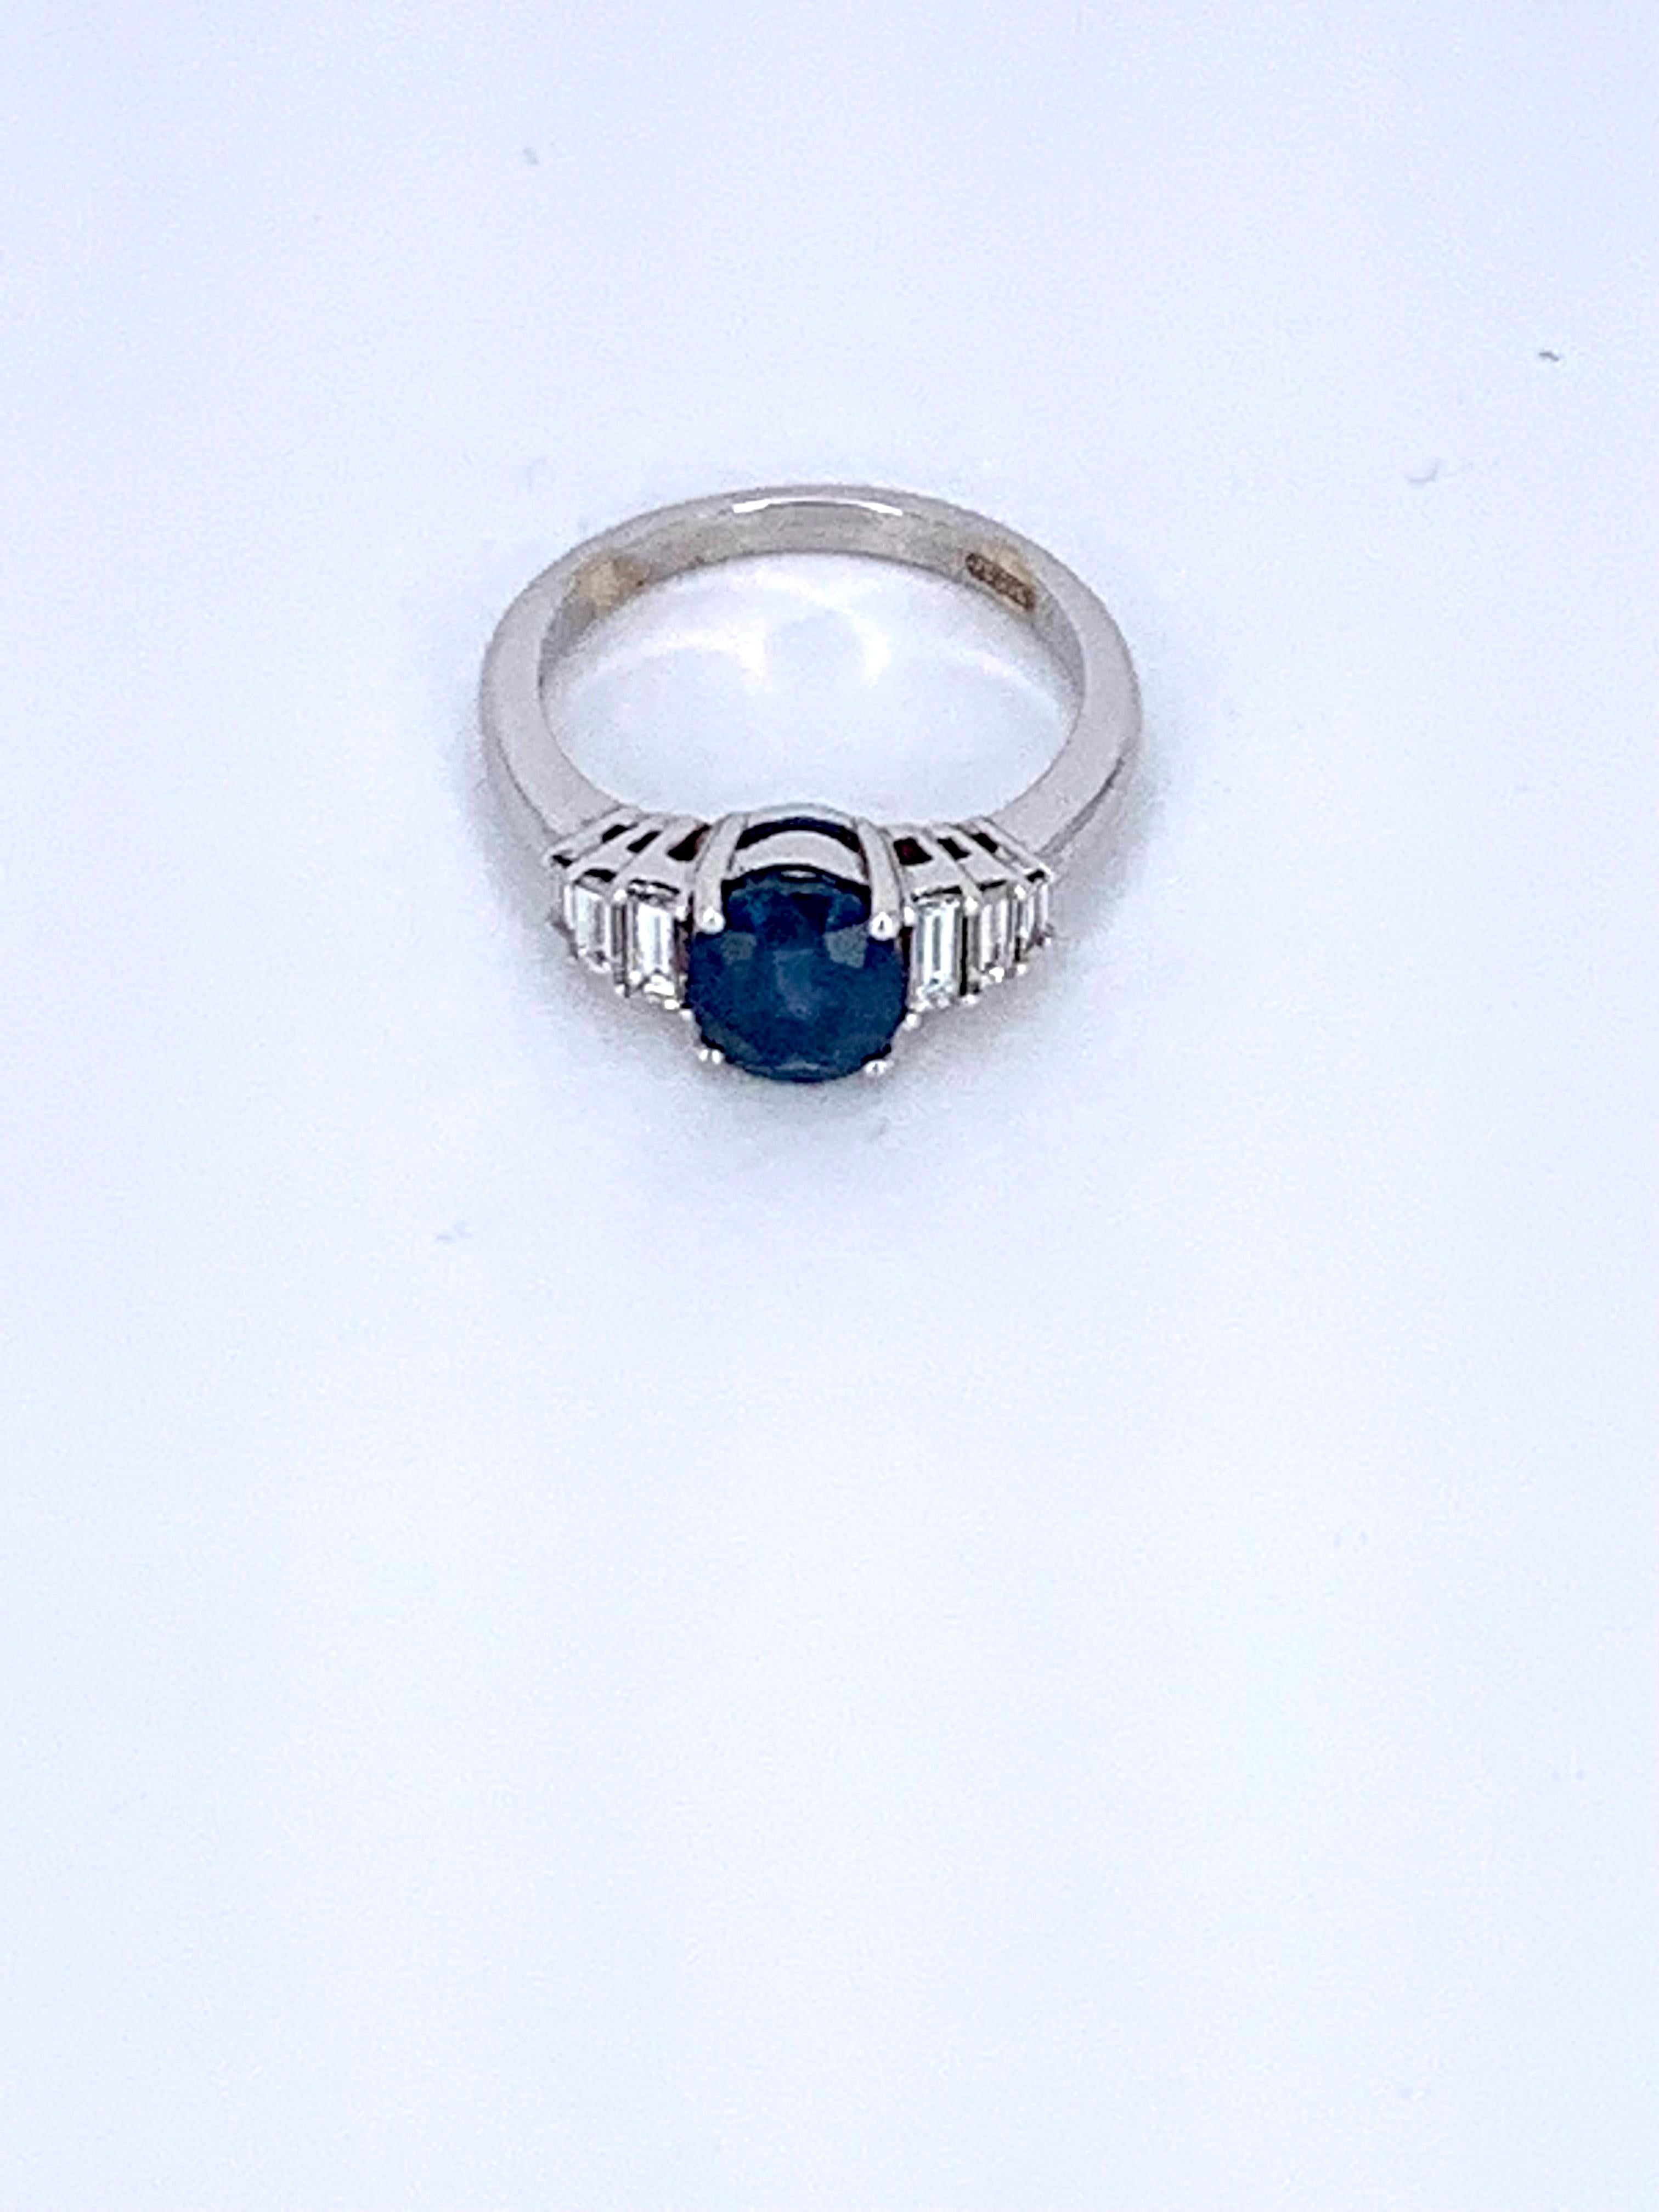 This exquisite round Blue Sapphire 1.93 carat with 0.43 Carats of White Diamond baguette either side, is a beautiful cocktail ring set in 18Kt white Gold.

The circular Sapphire is dressed with Diamond baguettes on either side of the face of the